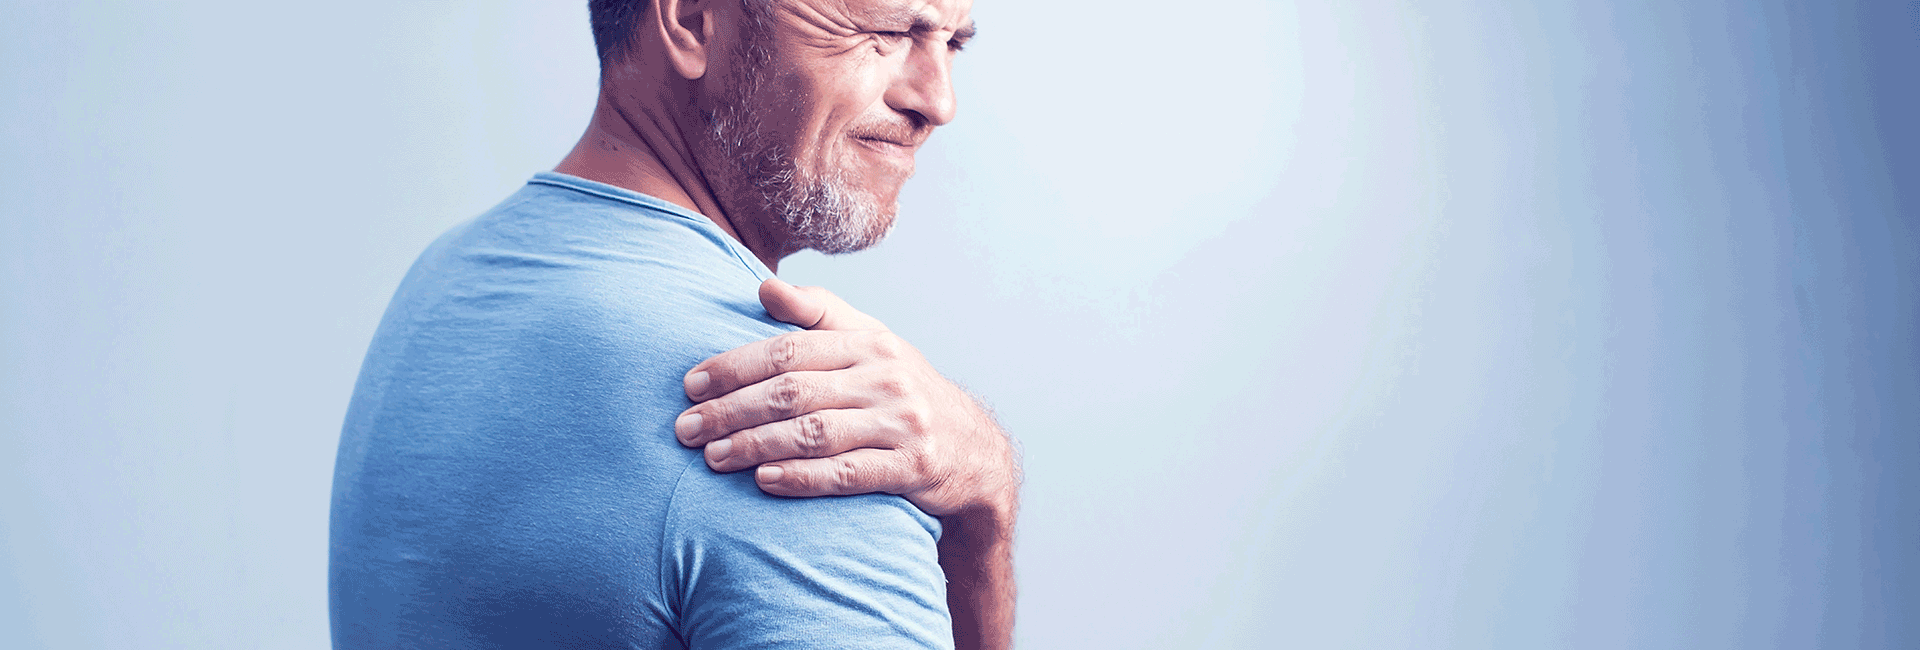 Shoulder-pain-and-injury